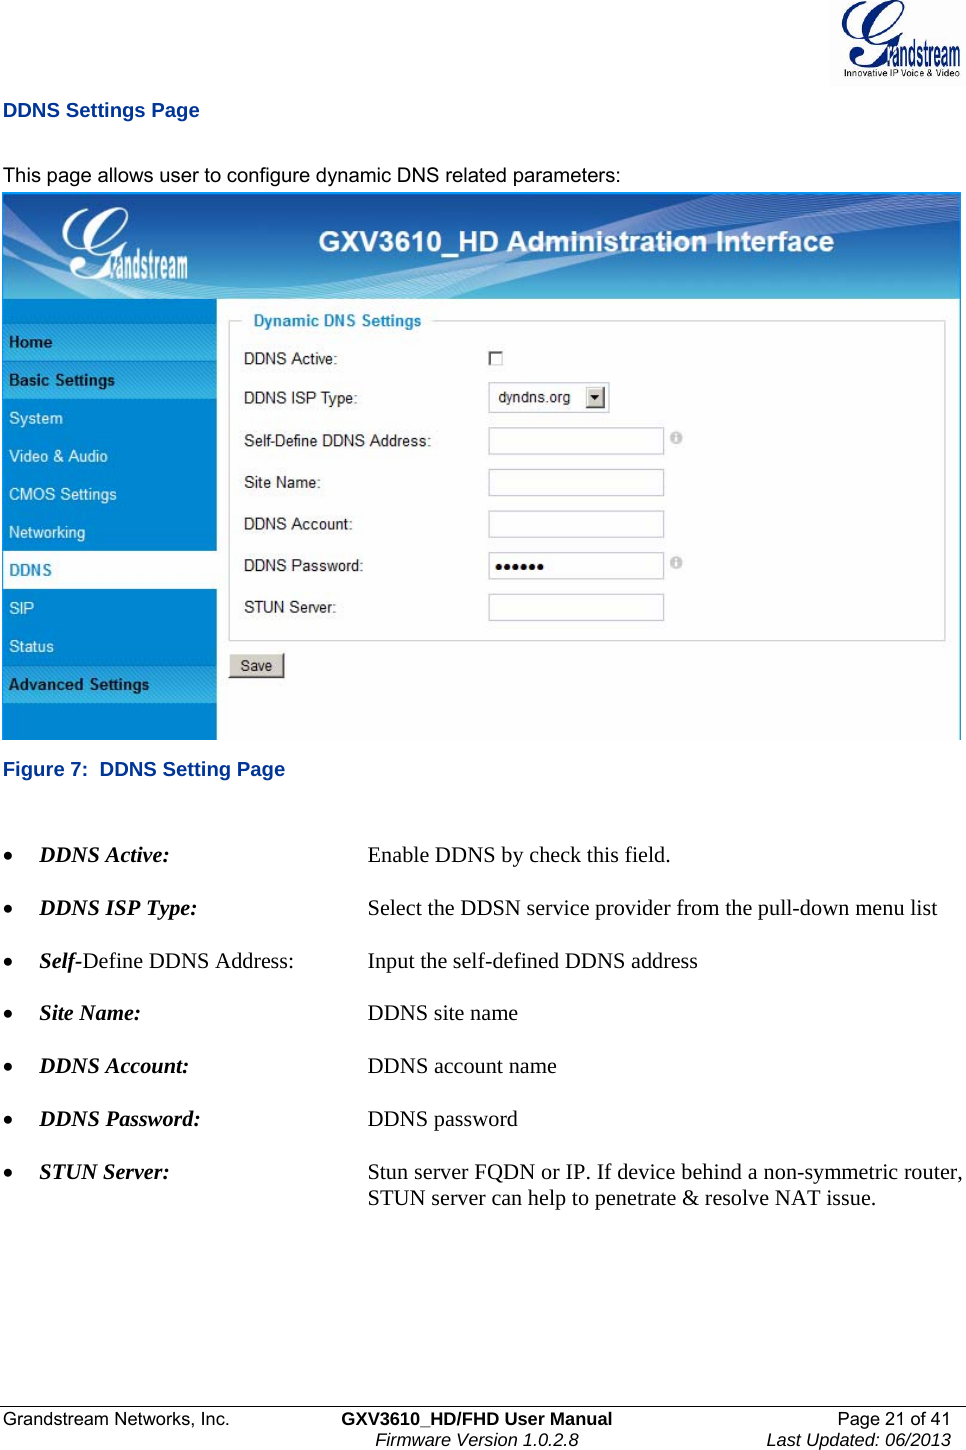  Grandstream Networks, Inc.  GXV3610_HD/FHD User Manual  Page 21 of 41    Firmware Version 1.0.2.8  Last Updated: 06/2013  DDNS Settings Page  This page allows user to configure dynamic DNS related parameters:  Figure 7:  DDNS Setting Page  • DDNS Active:       Enable DDNS by check this field.   • DDNS ISP Type:      Select the DDSN service provider from the pull-down menu list  • Self-Define DDNS Address:   Input the self-defined DDNS address  • Site Name:     DDNS site name  • DDNS Account:       DDNS account name  • DDNS Password:       DDNS password  • STUN Server:      Stun server FQDN or IP. If device behind a non-symmetric router,           STUN server can help to penetrate &amp; resolve NAT issue.     